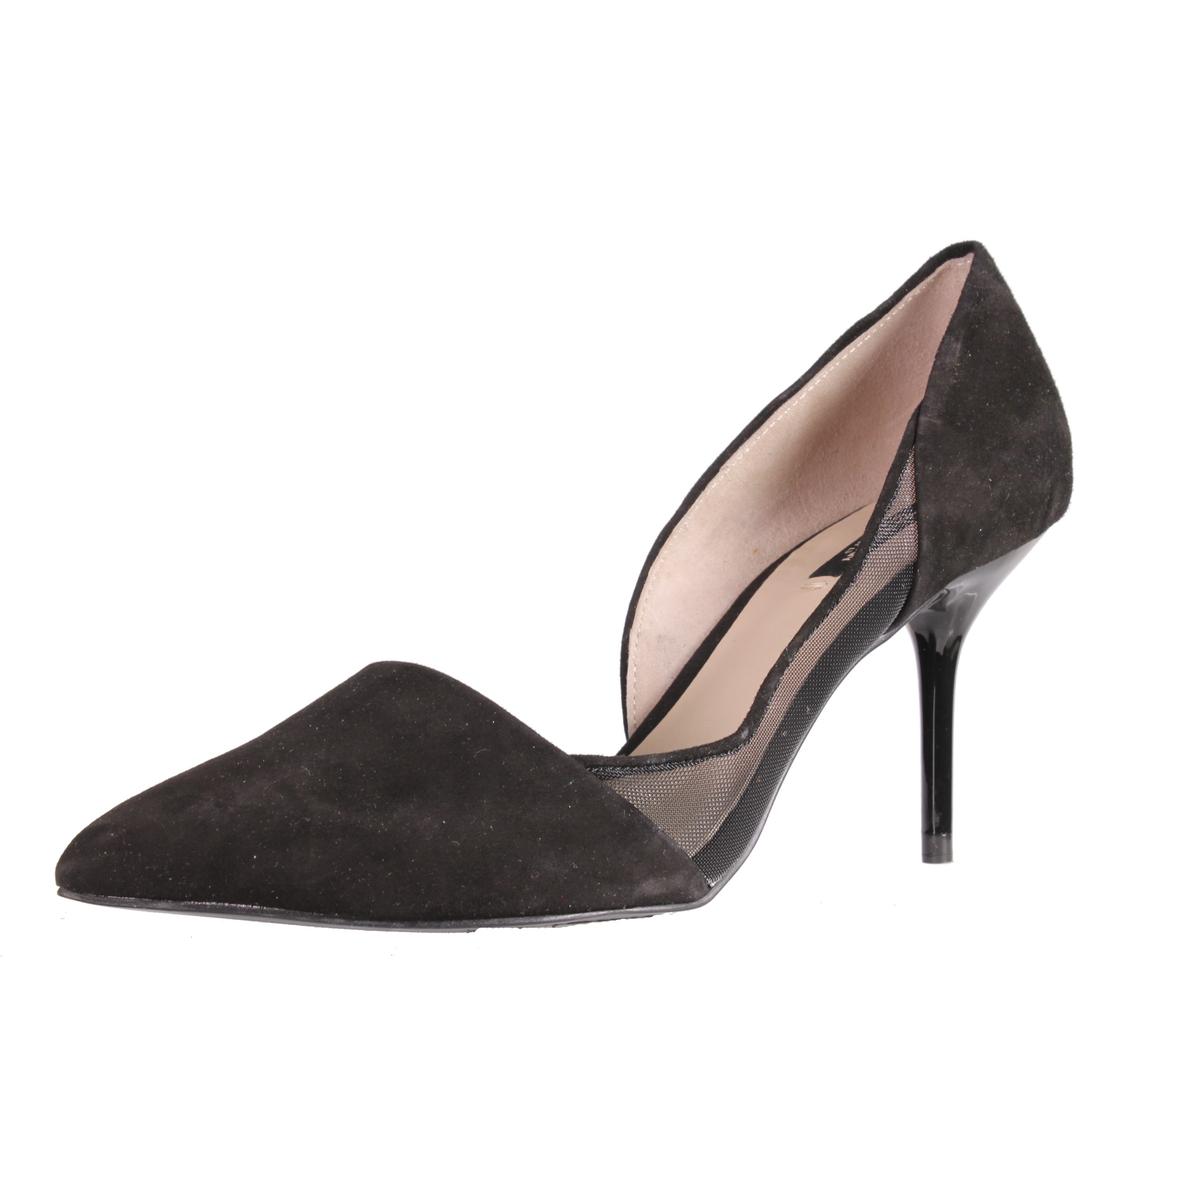 Zara 0946 Womens Black Suede Pointed-Toe Slip On Pumps Shoes 7.5 BHFO ...